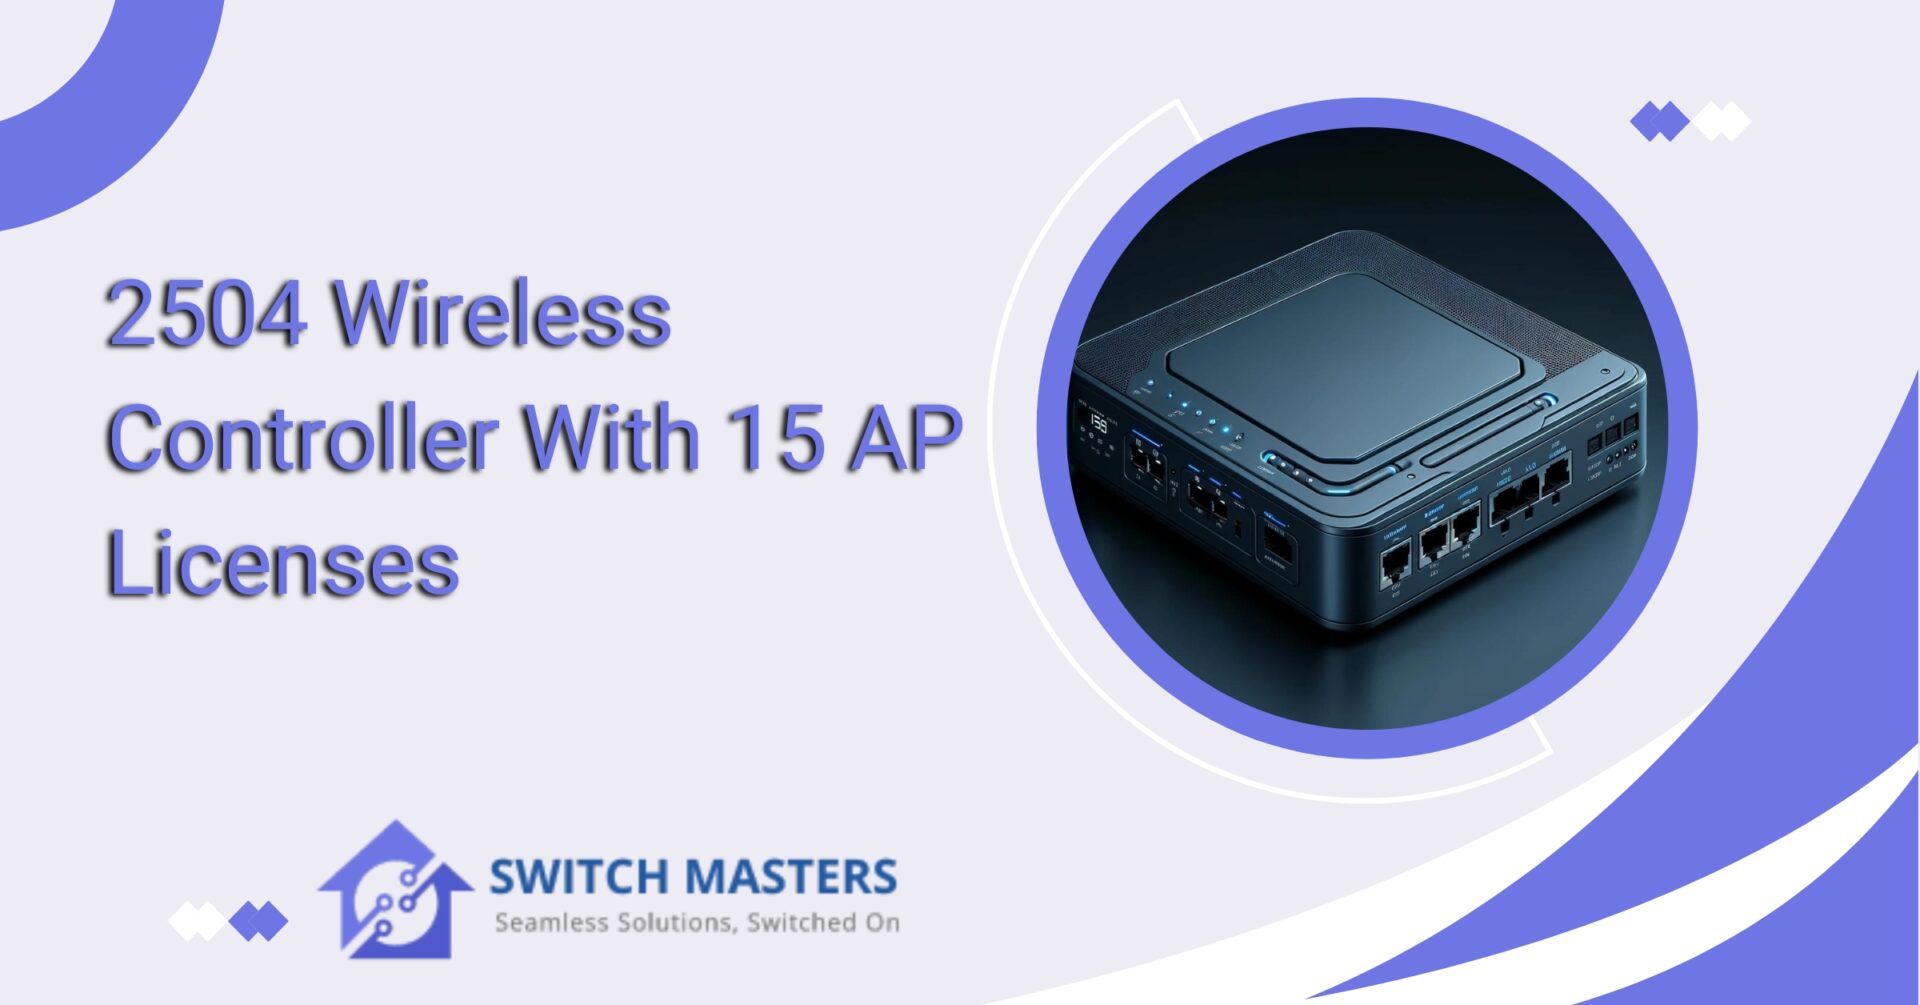 2504 Wireless Controller With 15 AP Licenses